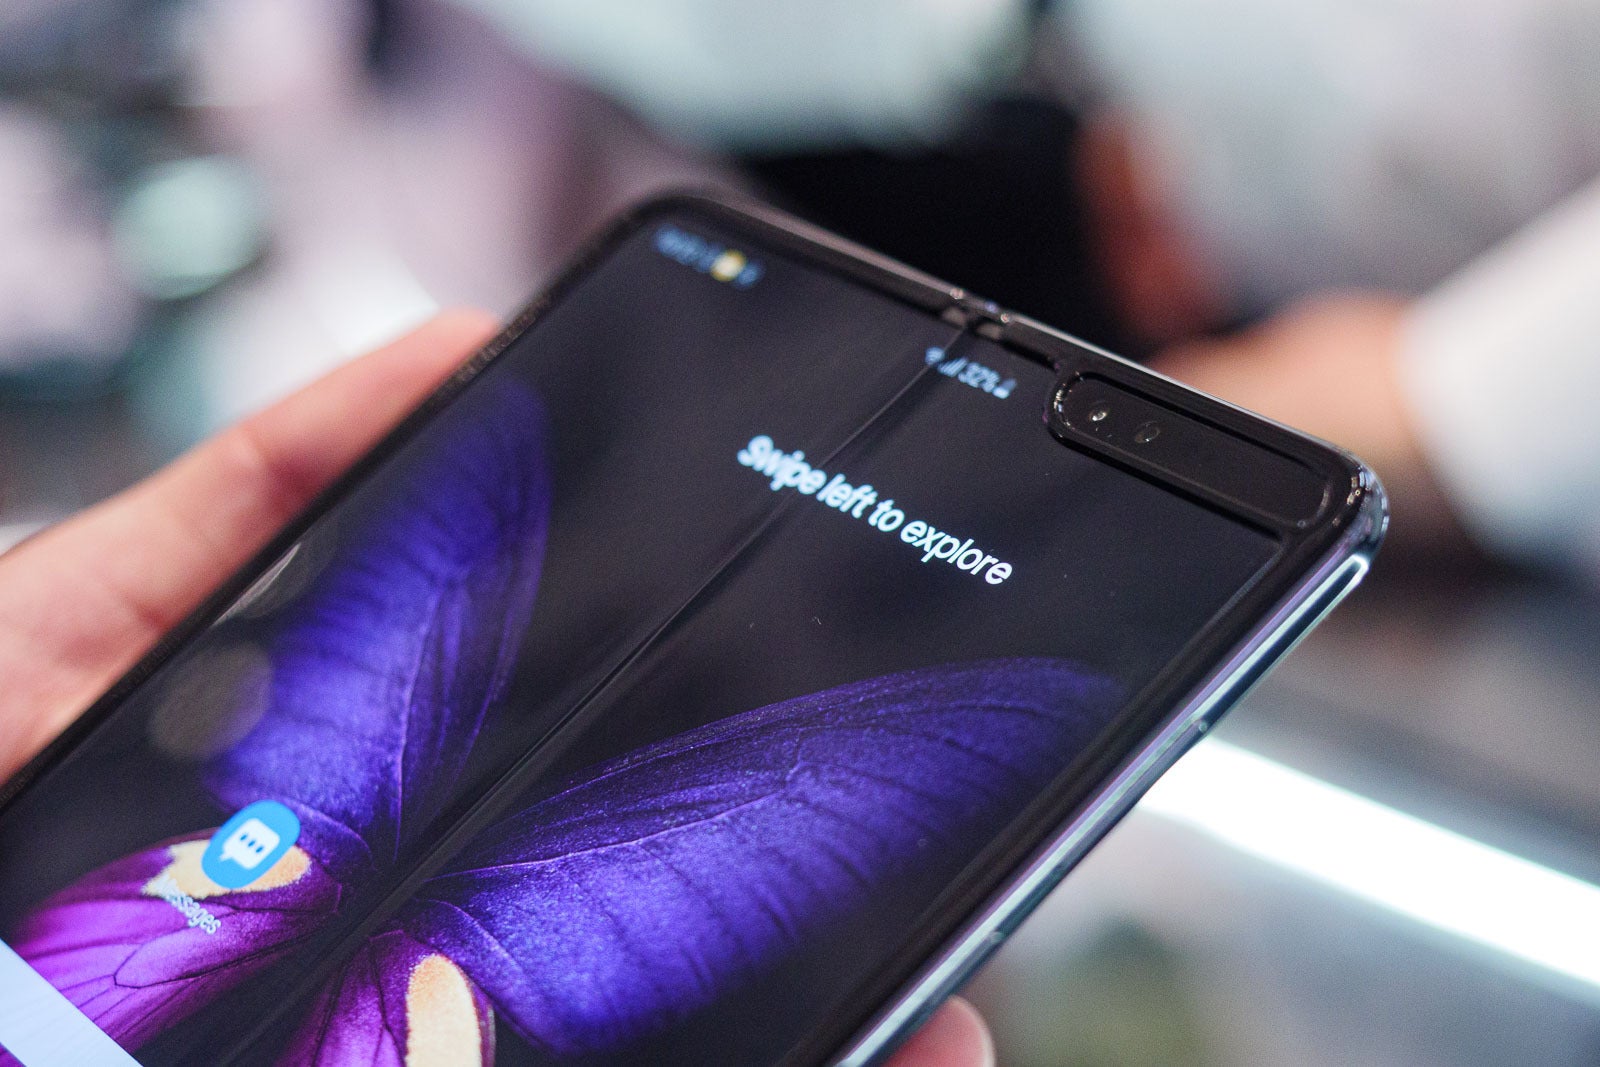 Samsung Galaxy Fold - Samsung wants to sell loads of foldable smartphones next year